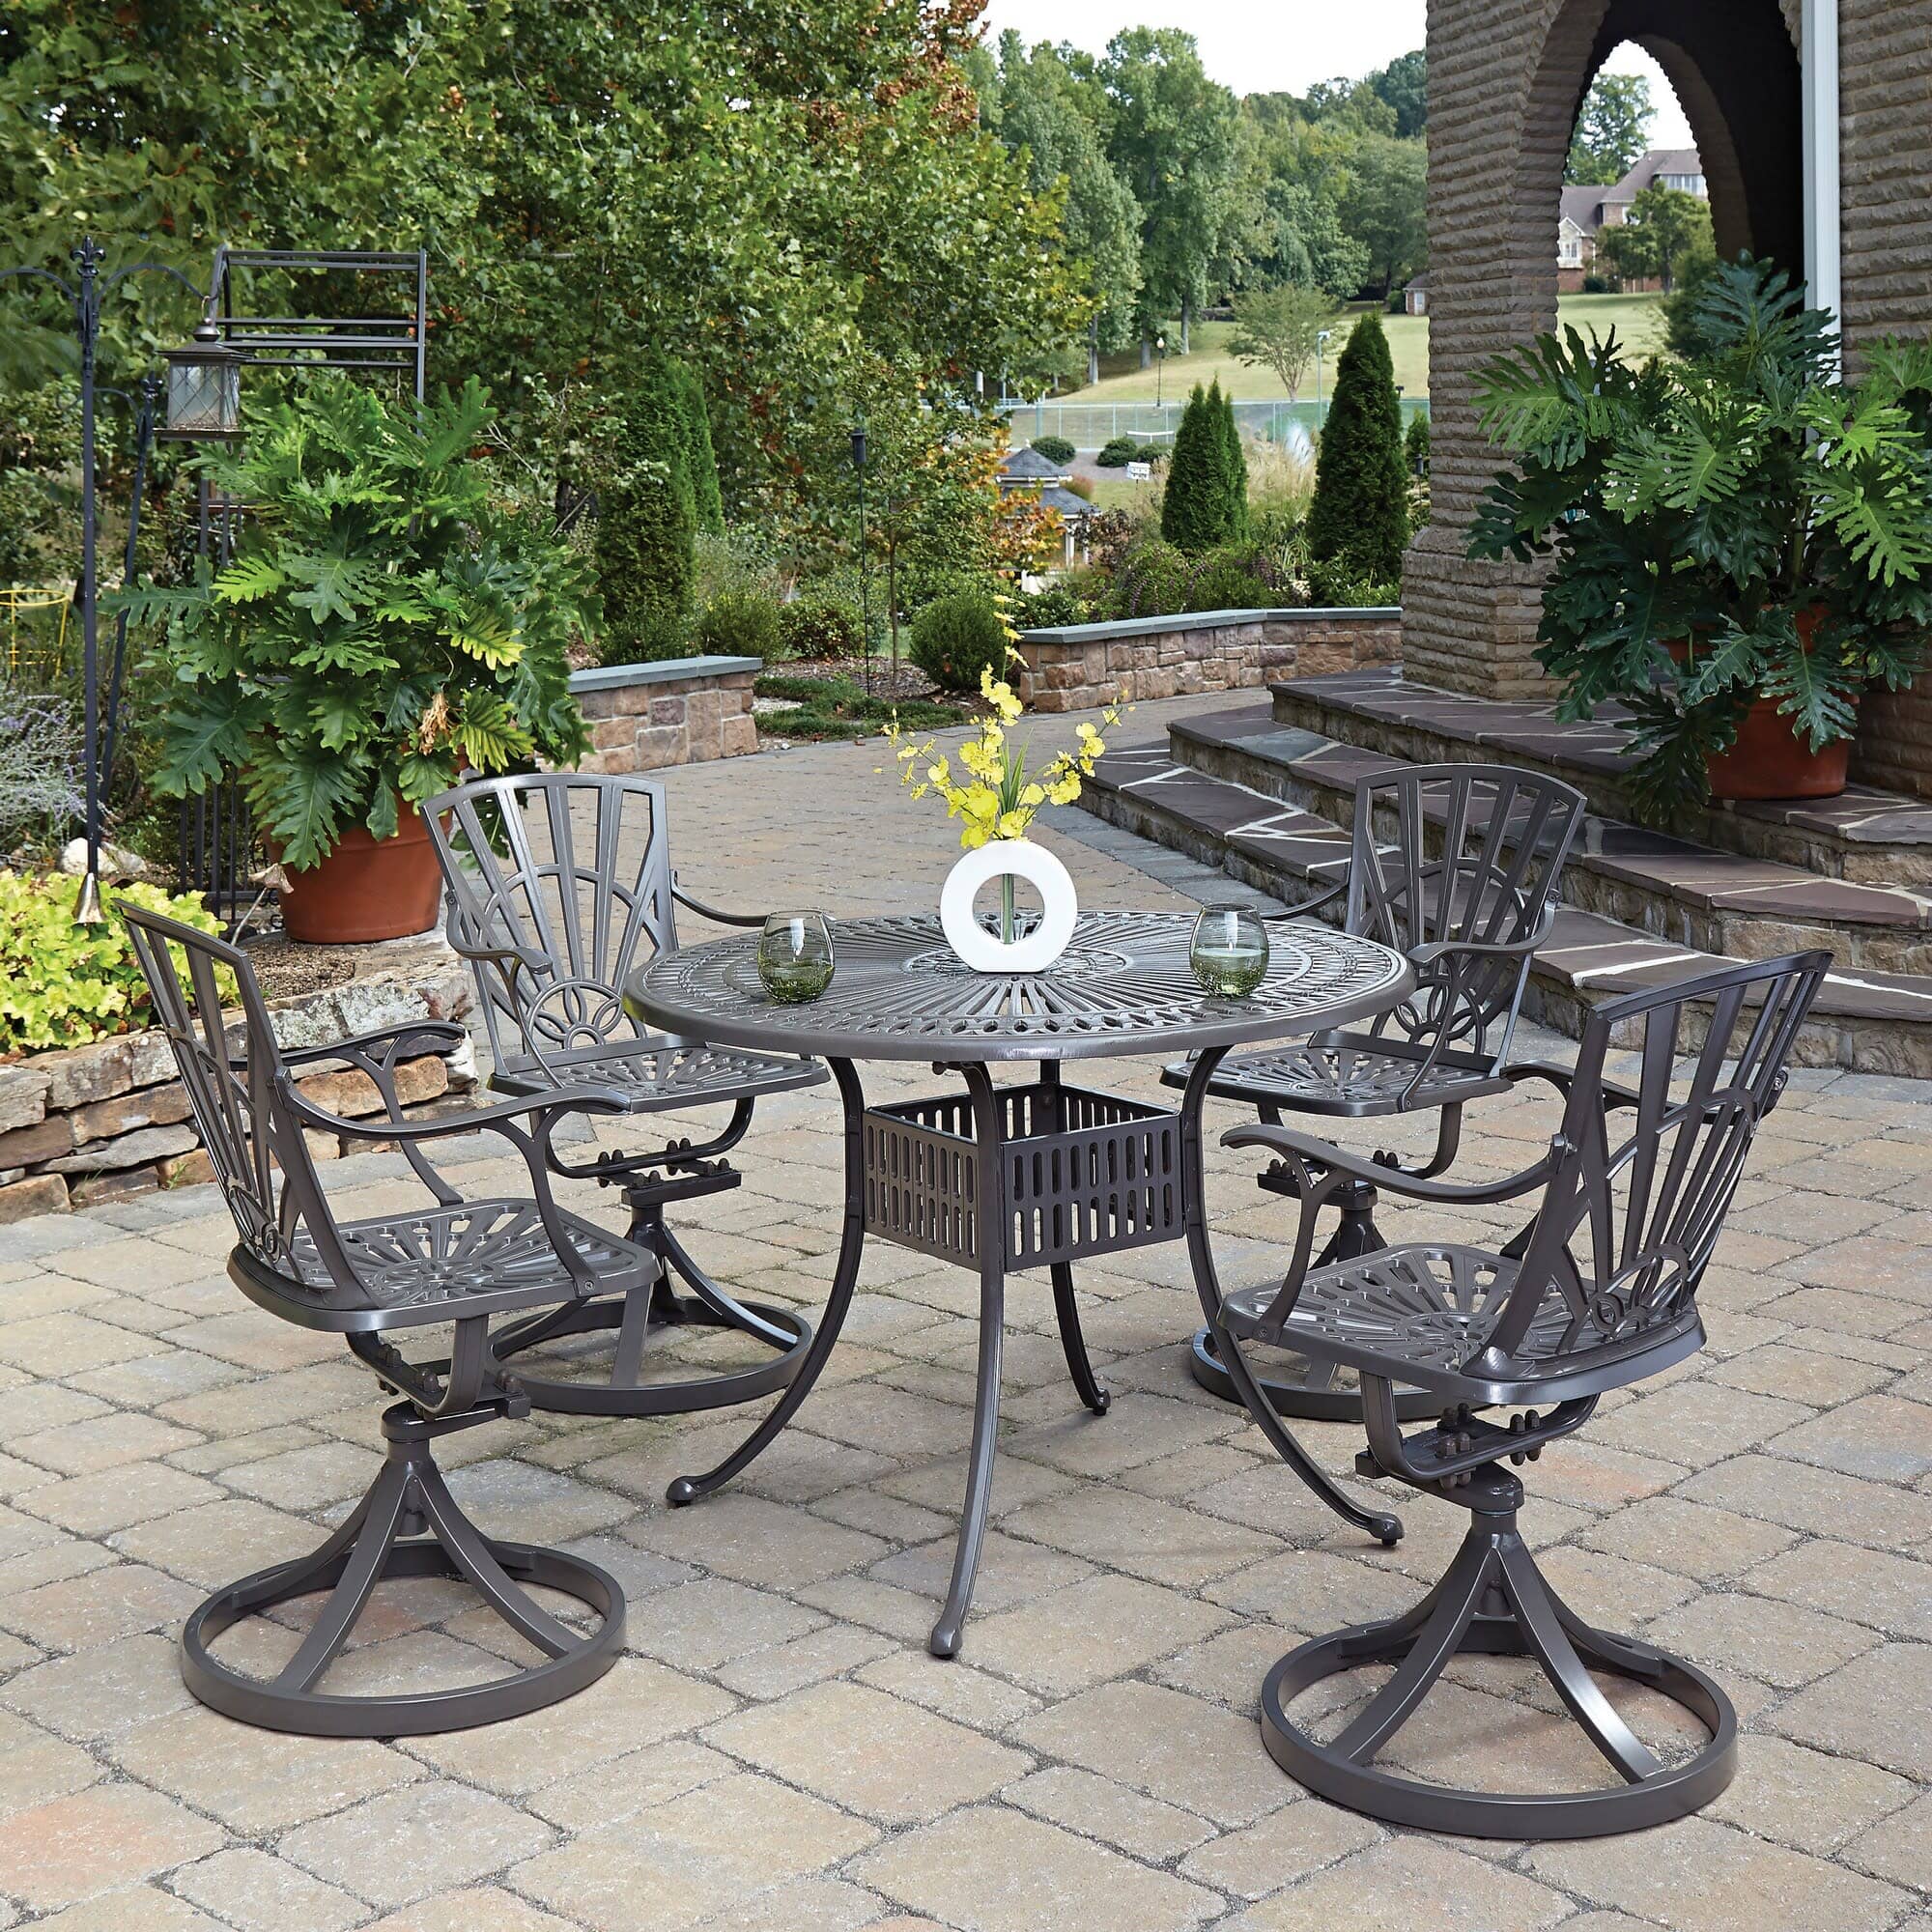 Traditional 5 Piece Outdoor Dining Set By Grenada Outdoor Dining Set Grenada